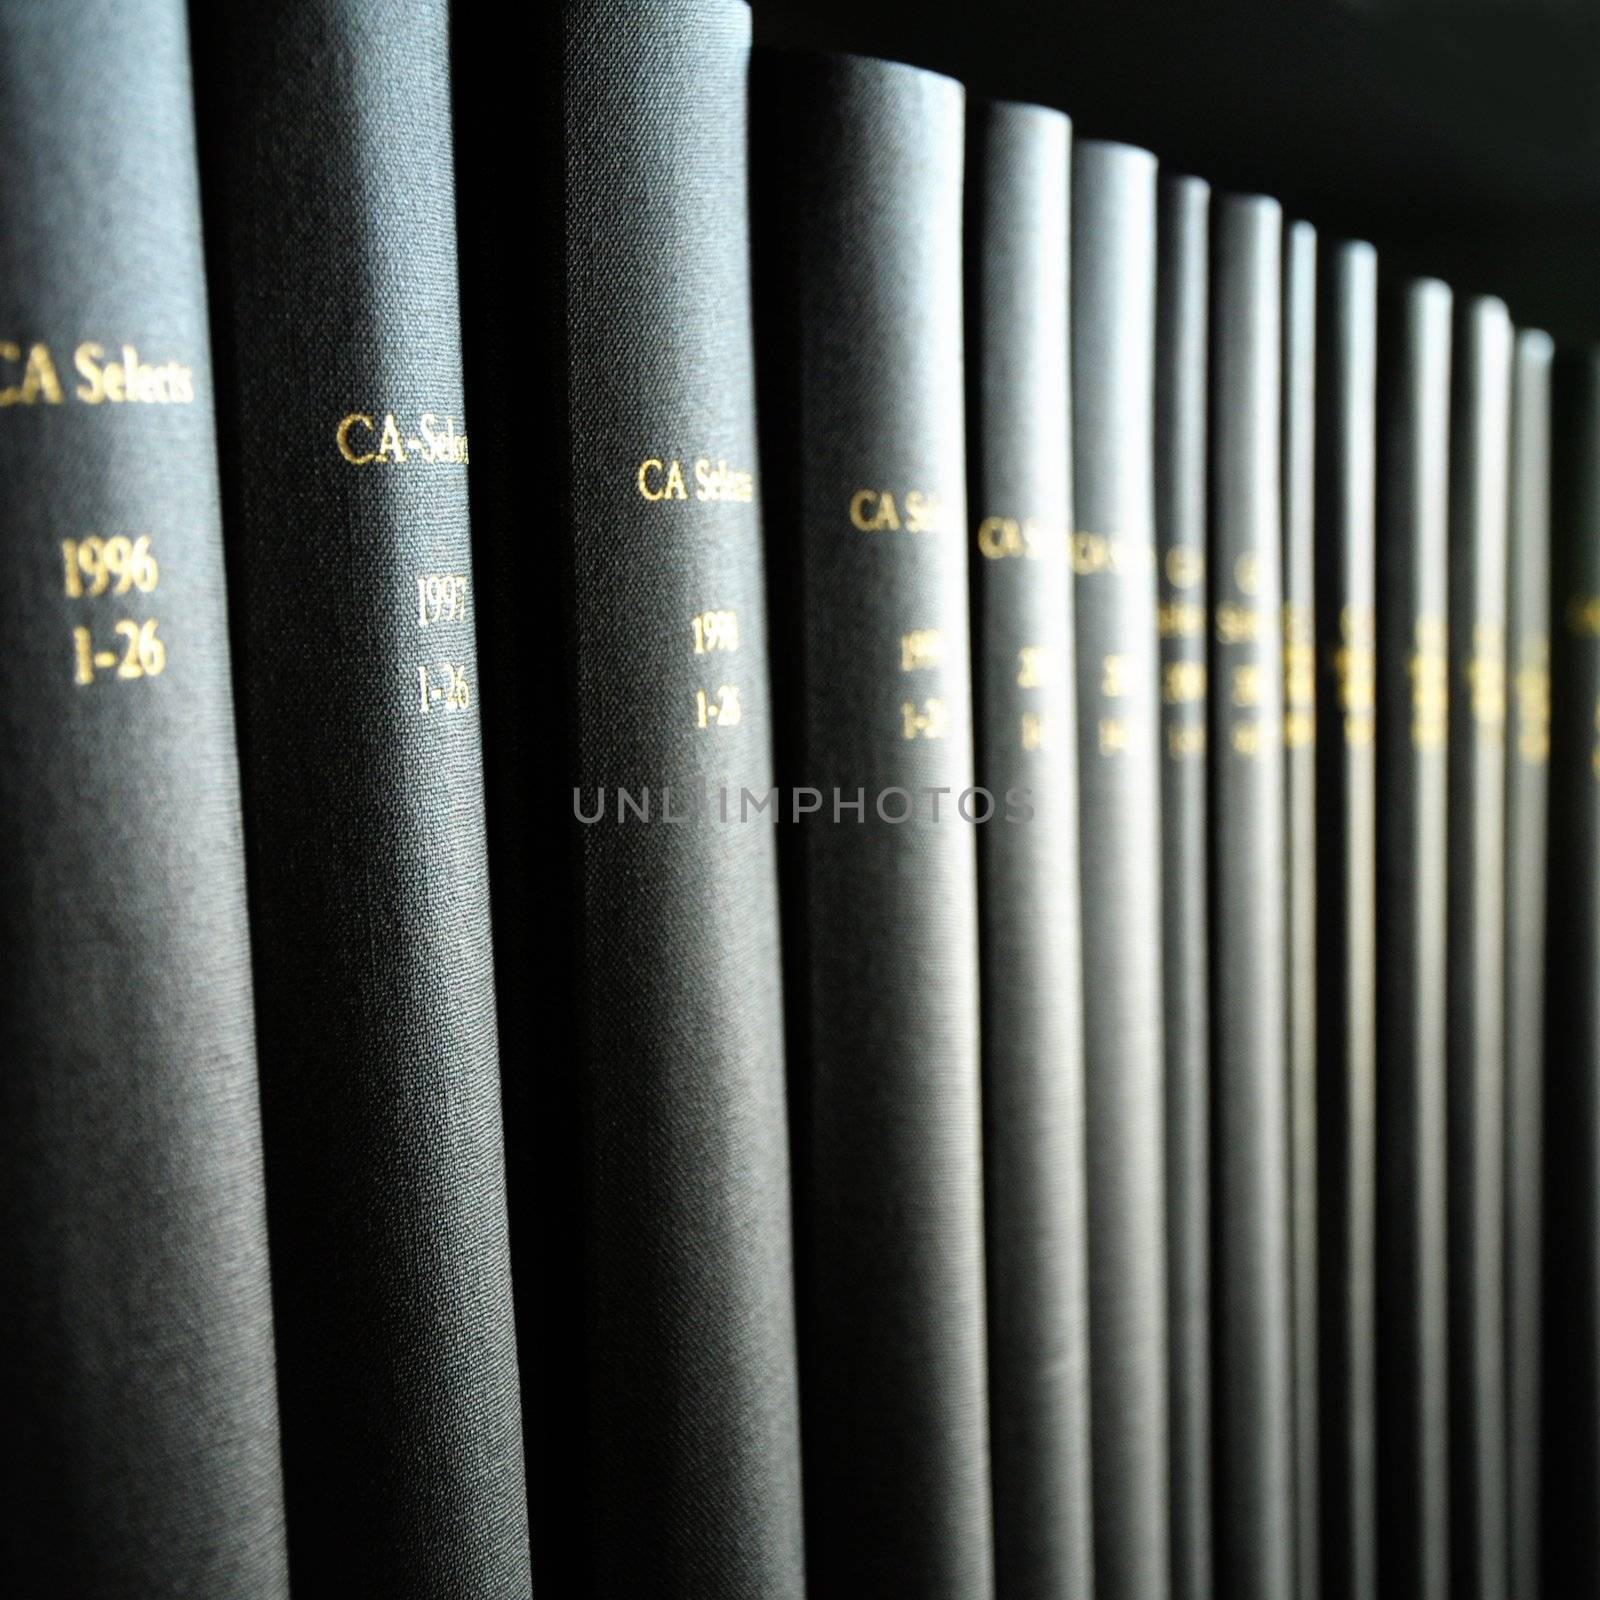 books in a library by gunnar3000